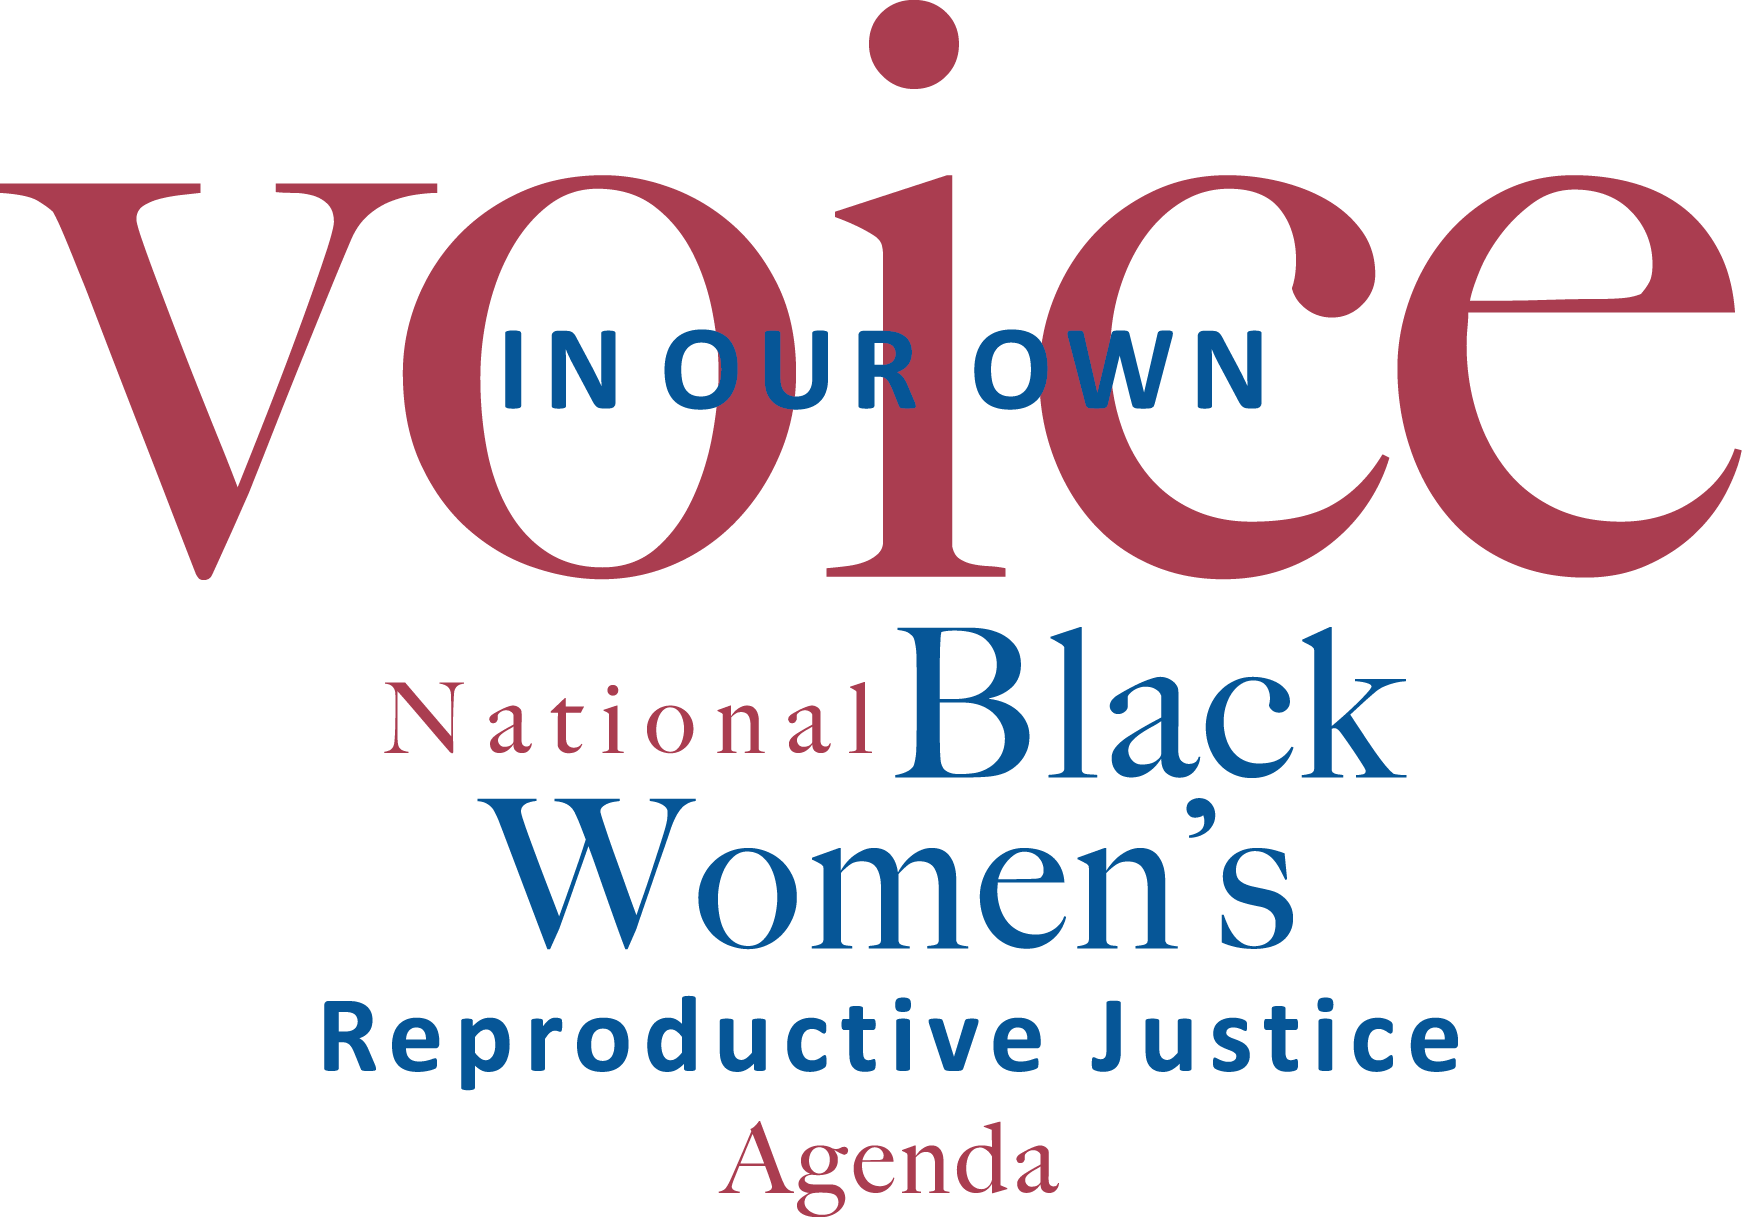 In Our Own Voice: National Black Women’s Reproductive Justice Agenda logo